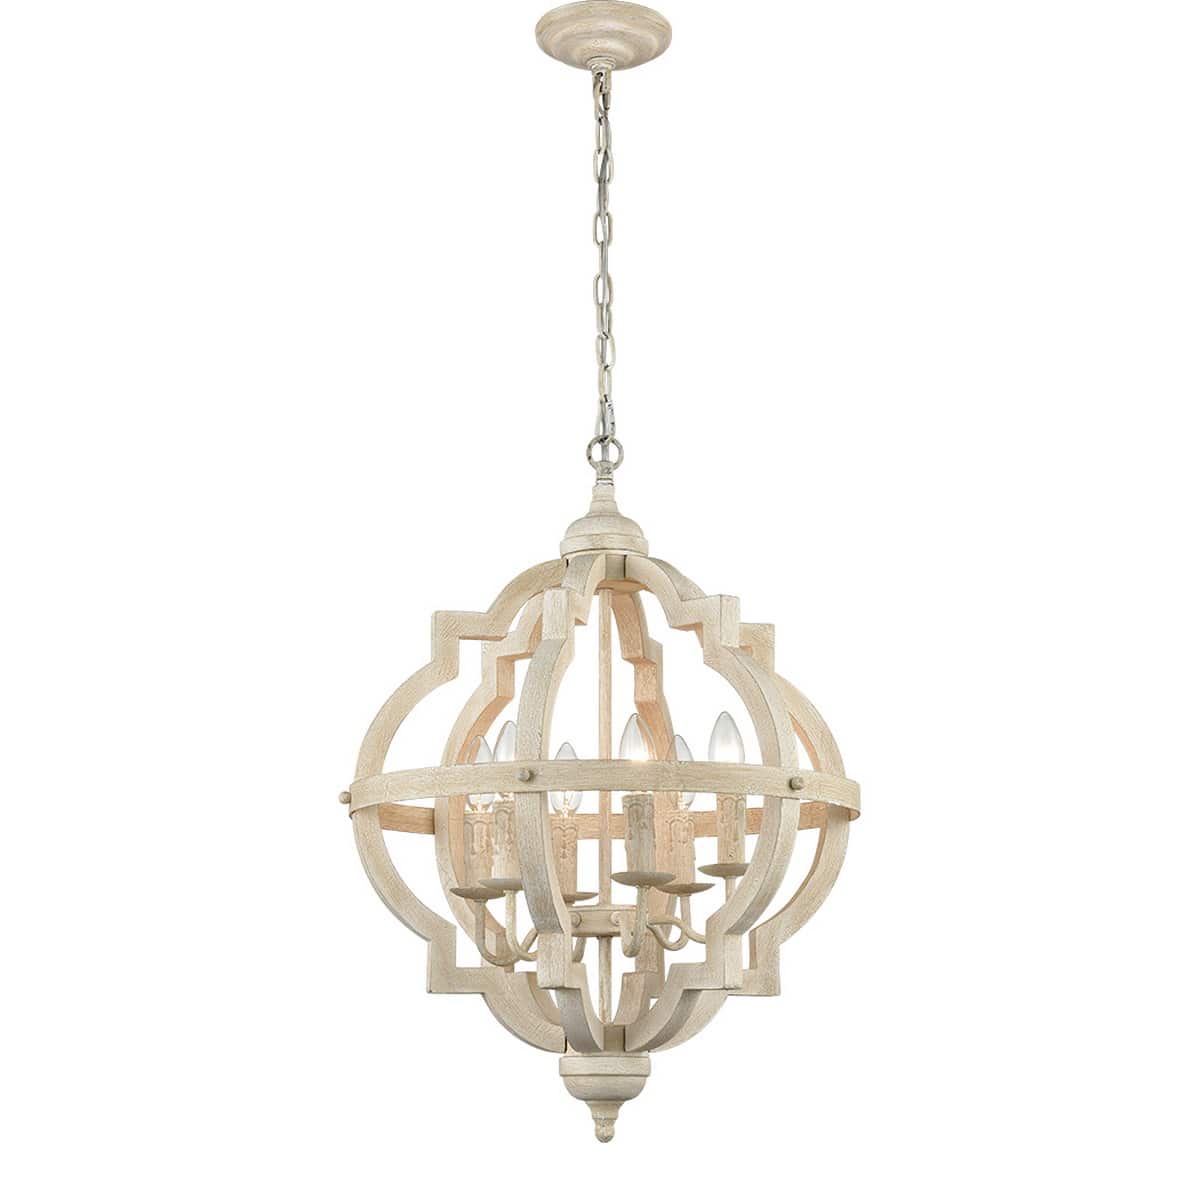 Distressed Off-white Wooden Chandelier Sphere 6 Light